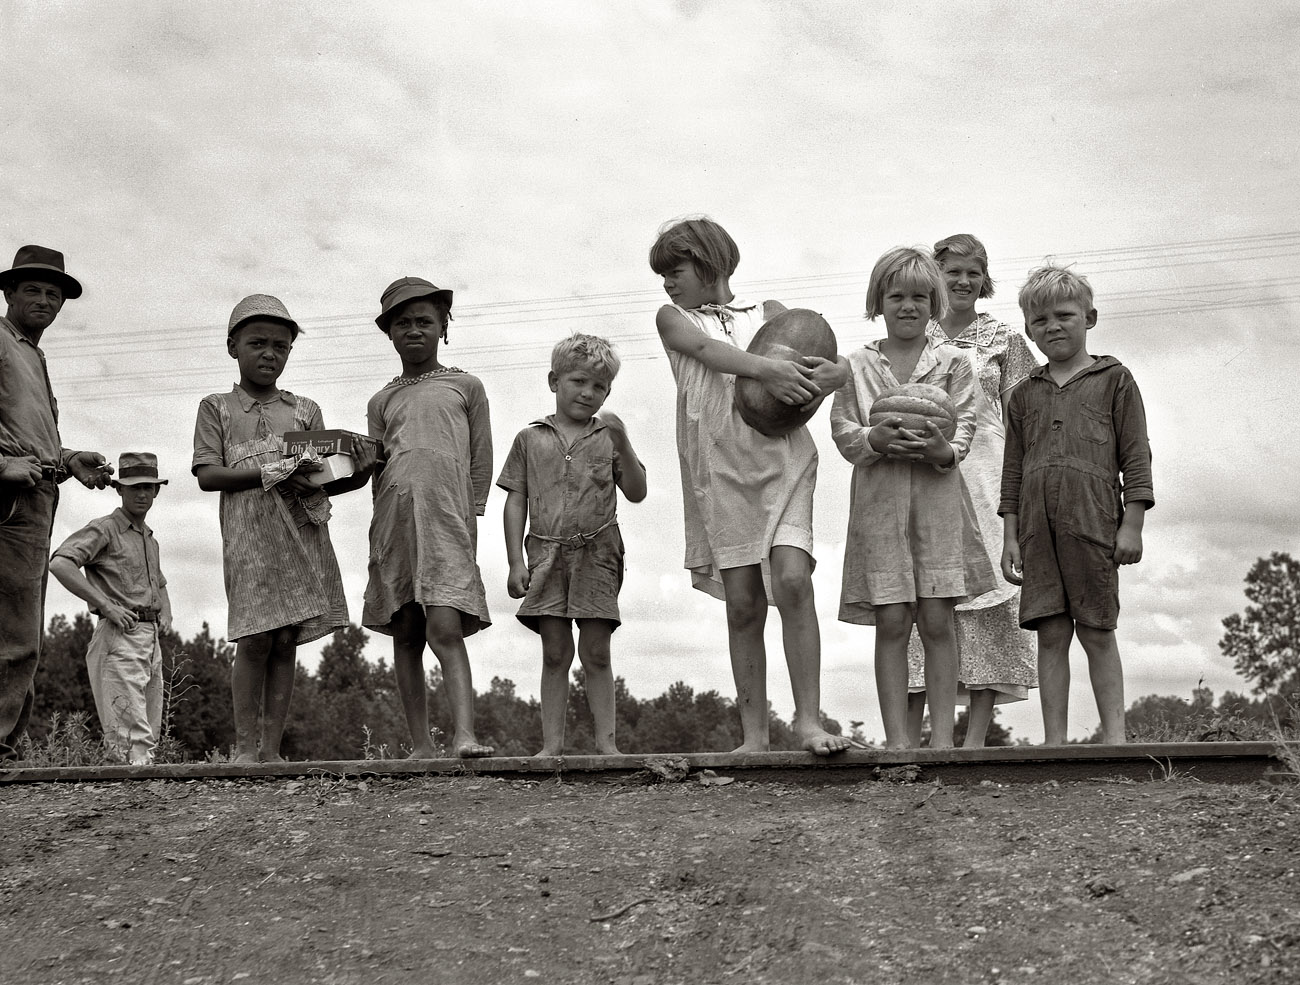 July 1936. Hillhouse, Mississippi. "Sharecroppers' families gathering needs for their Fourth of July celebration, whites and blacks together." View full size. 4x5 nitrate negative by by Dorothea Lange for the Farm Security Administration.